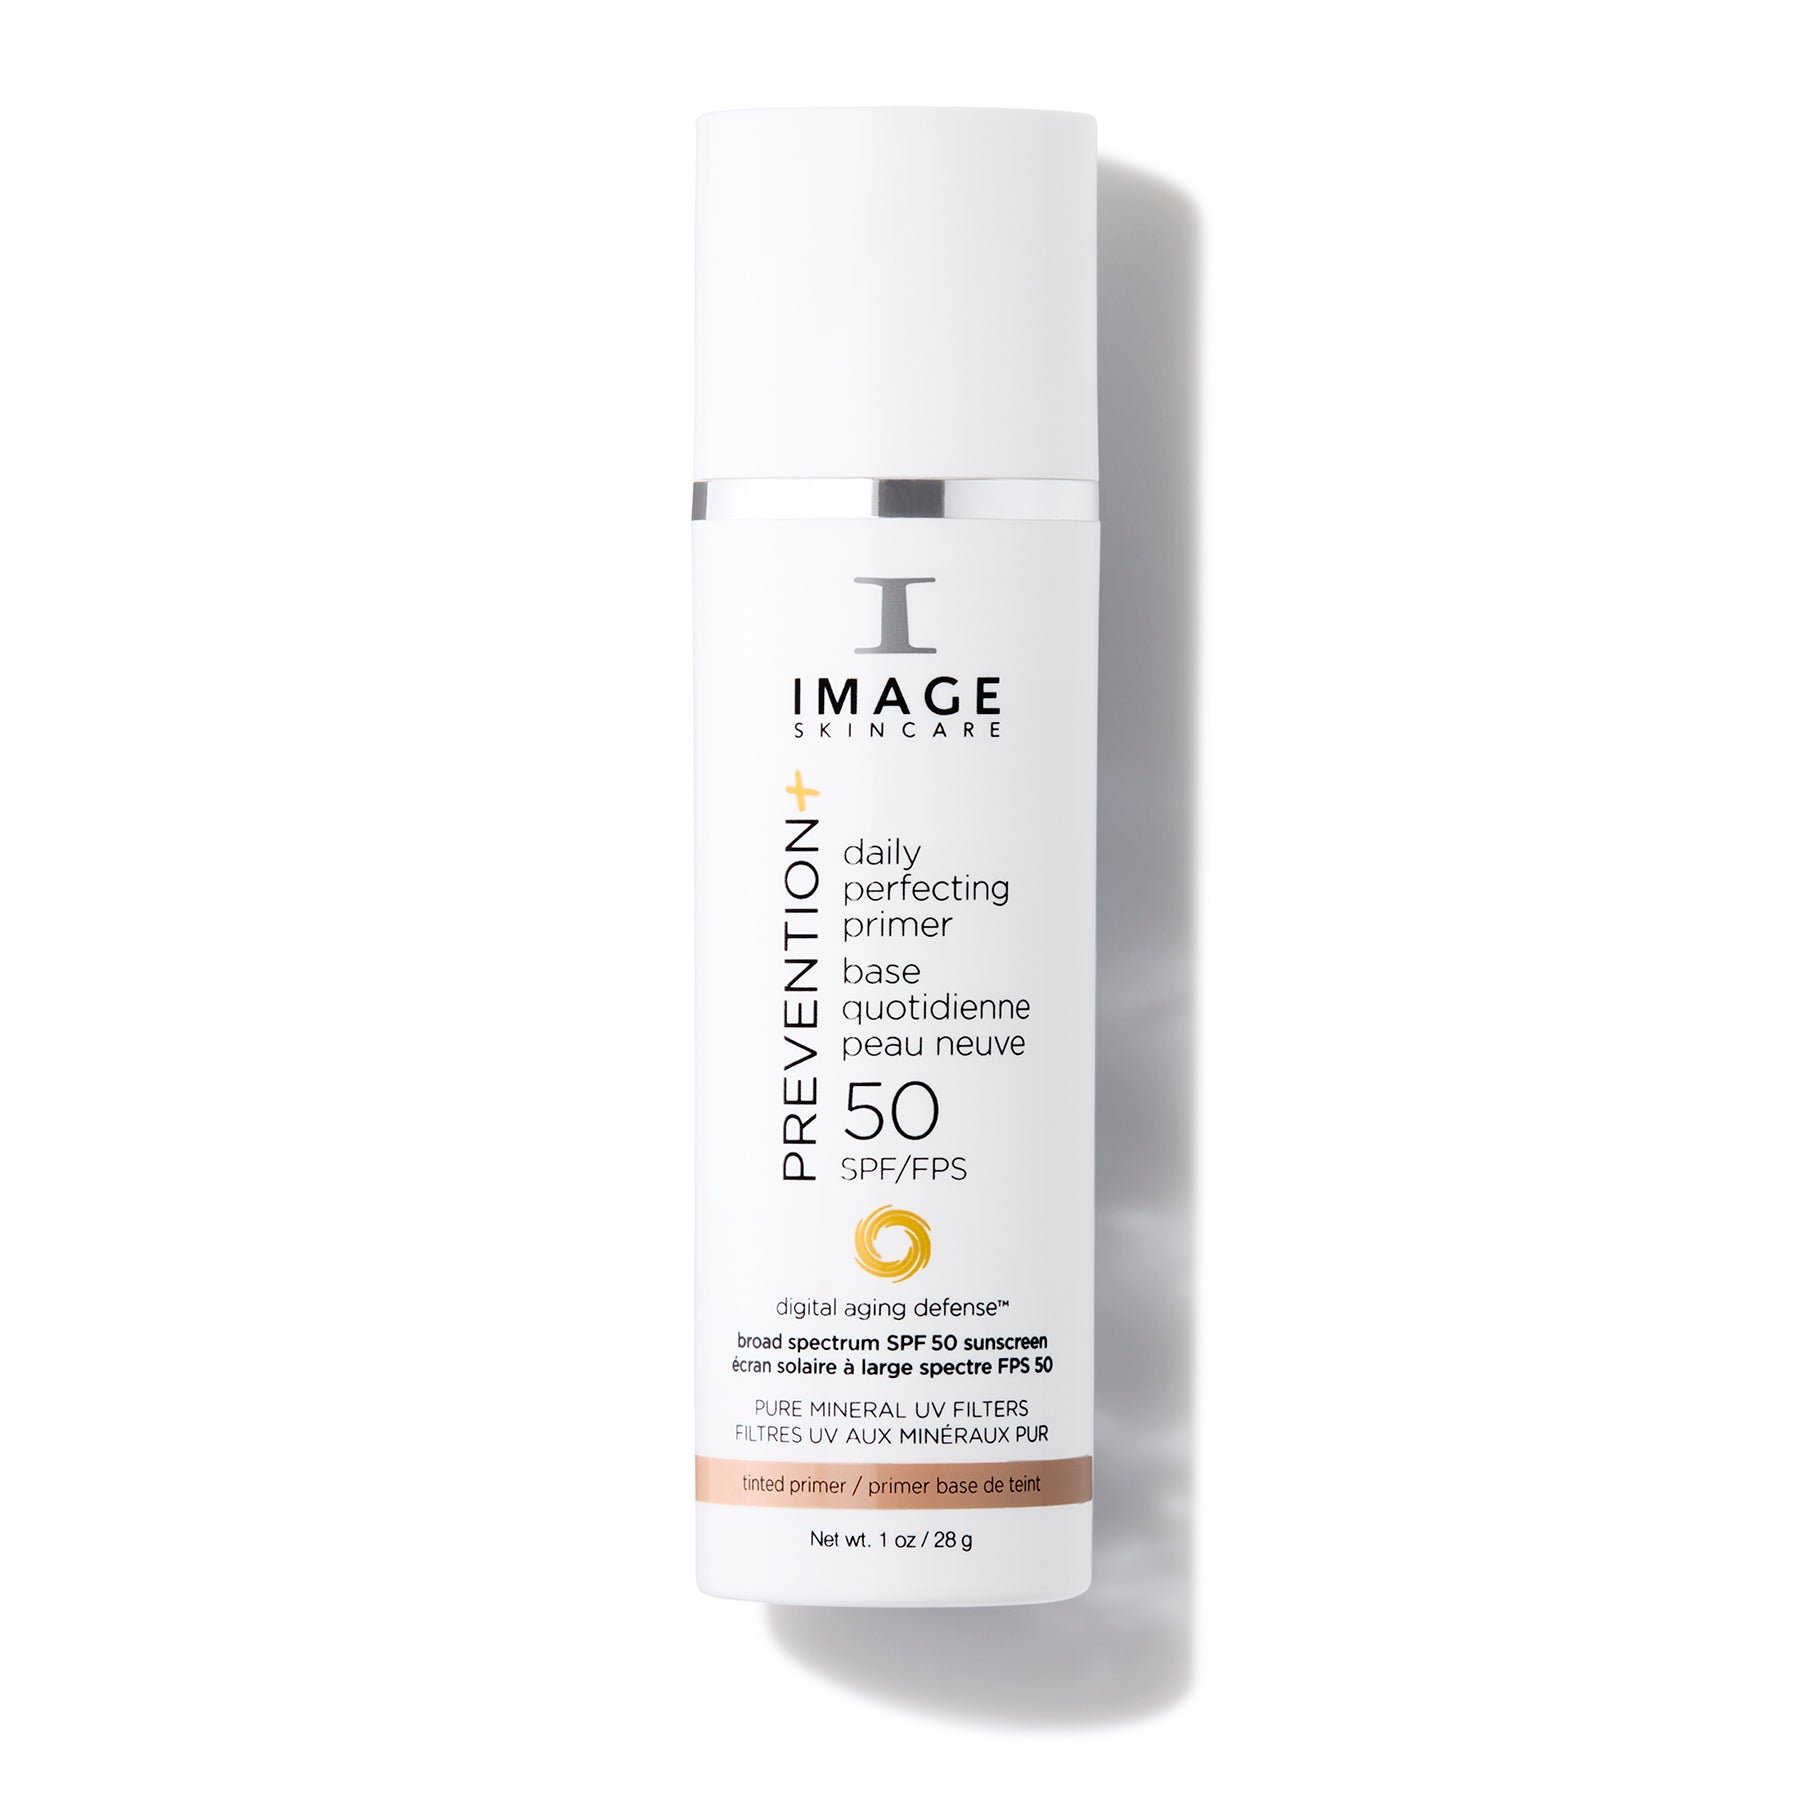 Image Skincare Prevention+ Daily Perfecting Primer SPF50 Shop At Exclusive Beauty